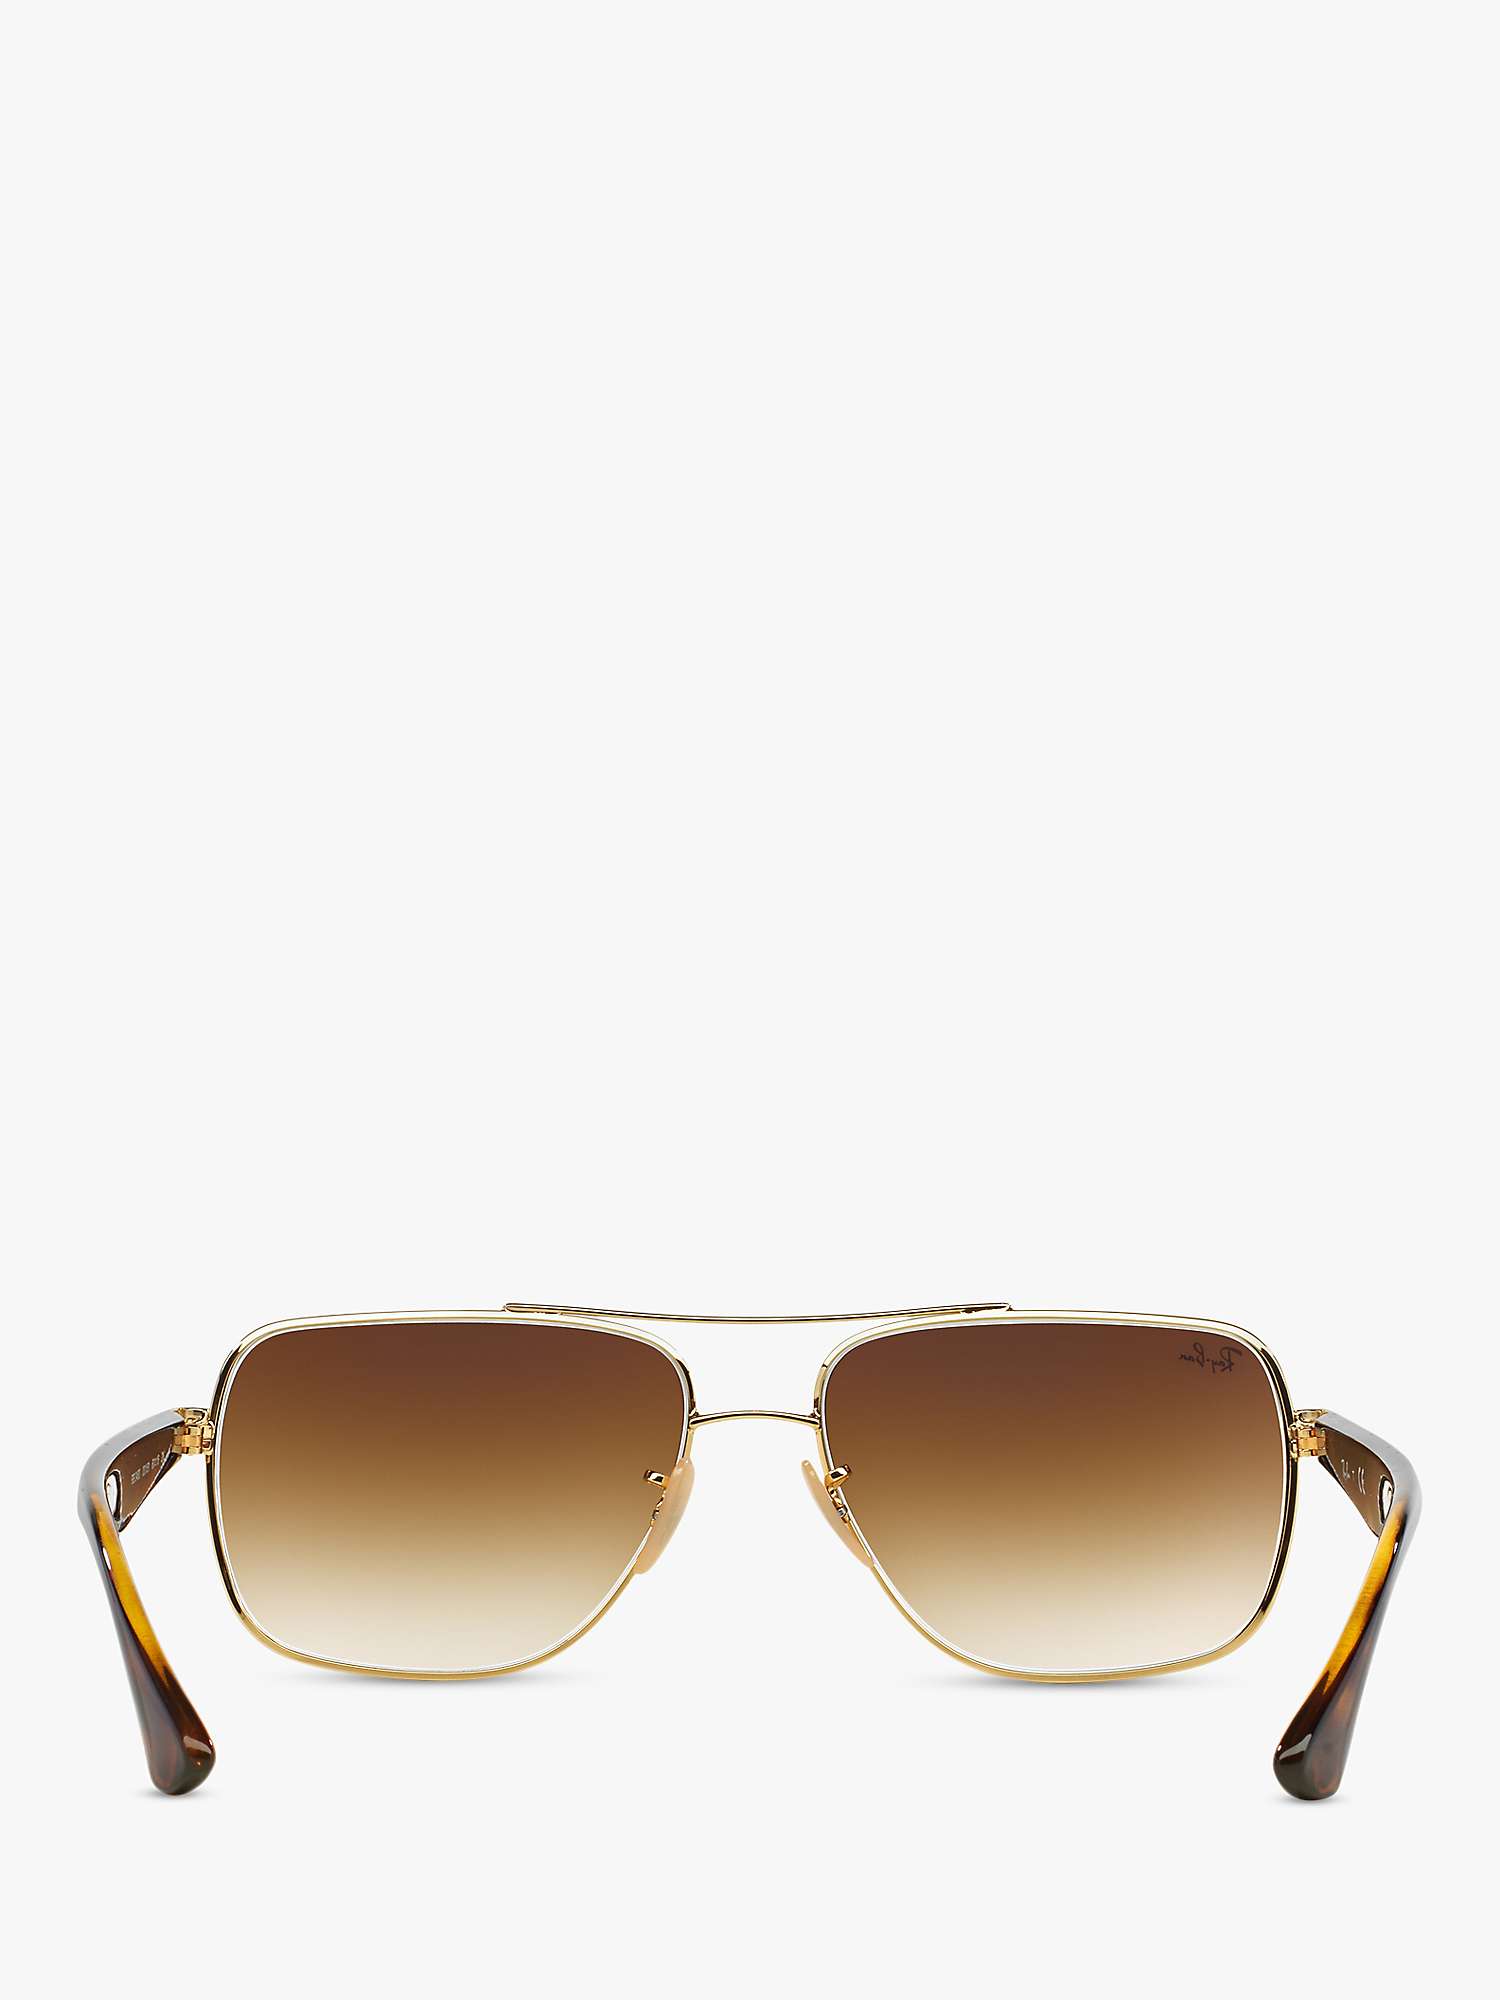 Buy Ray-Ban RB3484 Men's Square Sunglasses, Arista Gold/Brown Online at johnlewis.com